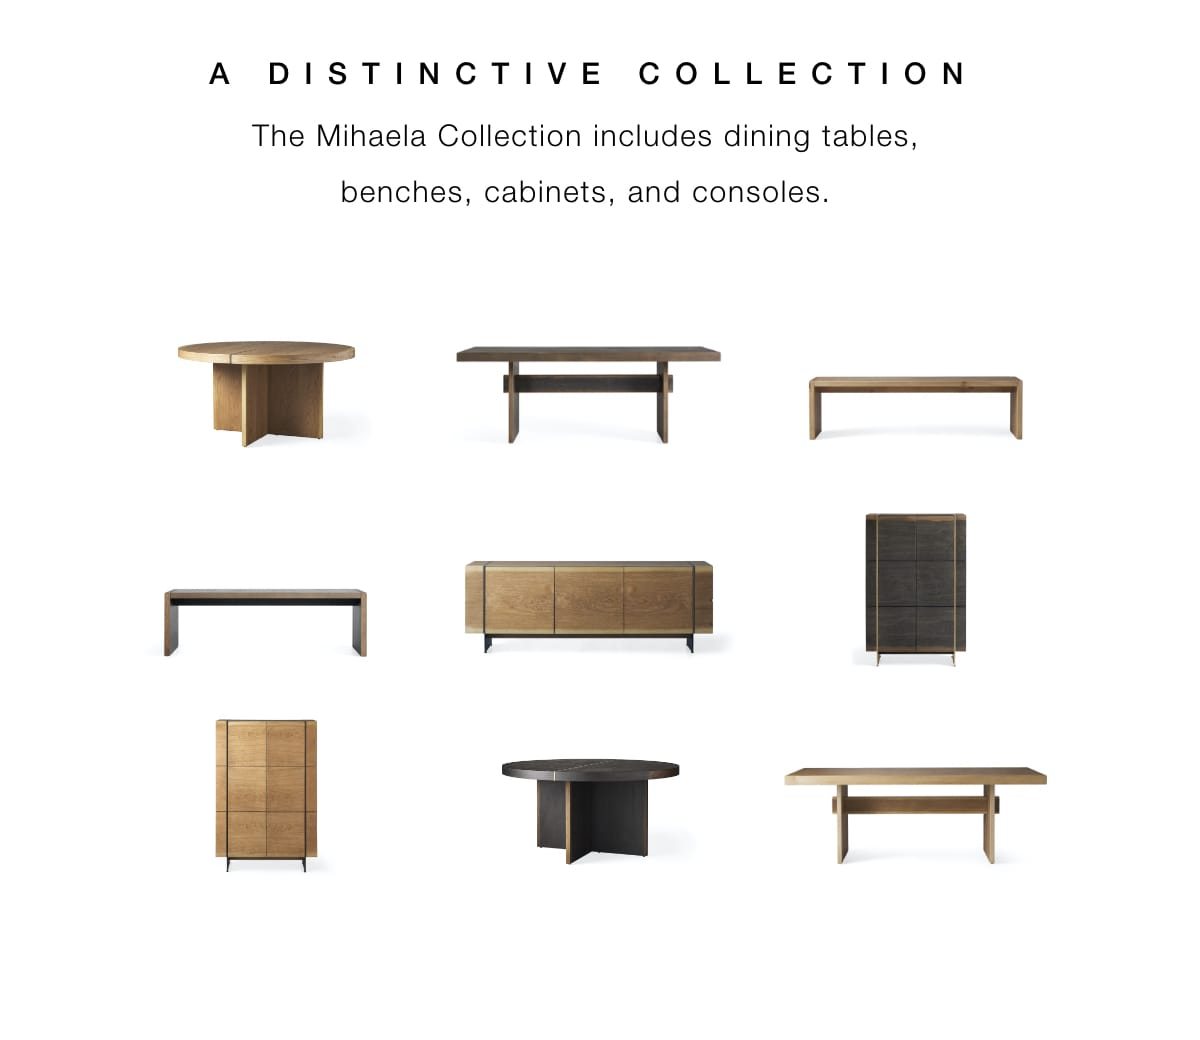 Explore dining tables, benches, cabinets and consoles